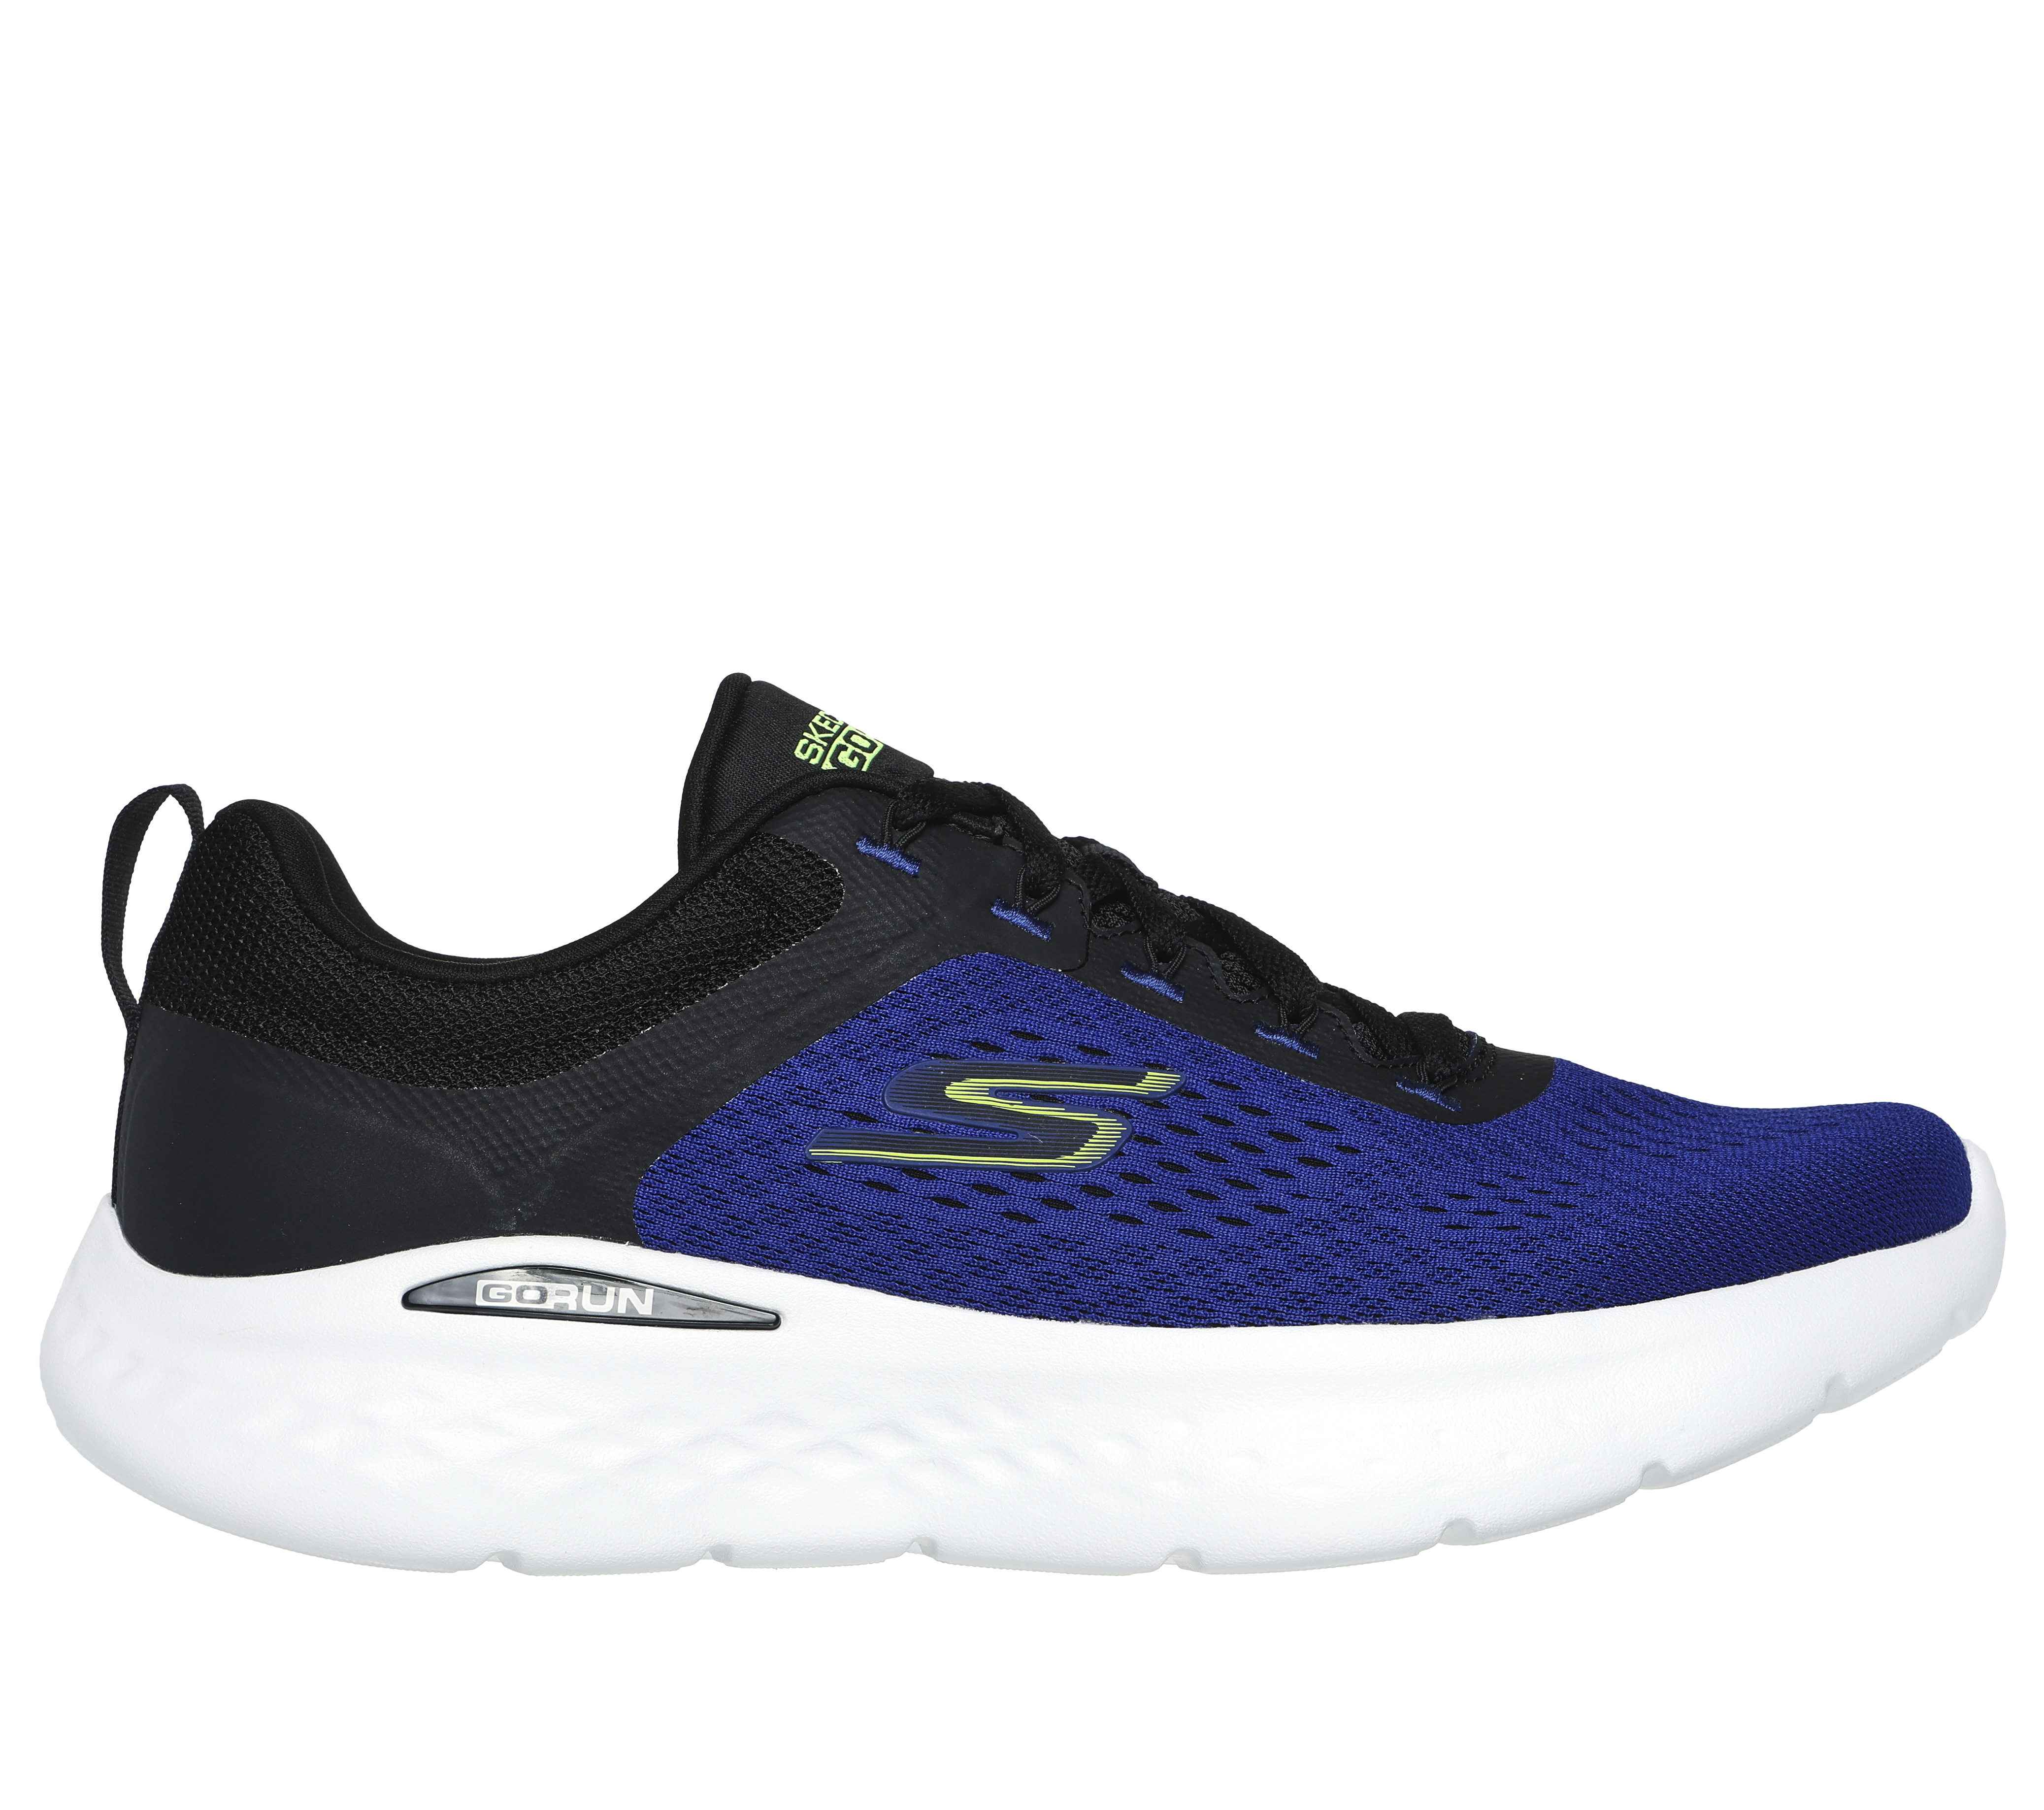 Skechers Men's Lite Foam Trainer in 2 Colours and 4 Sizes